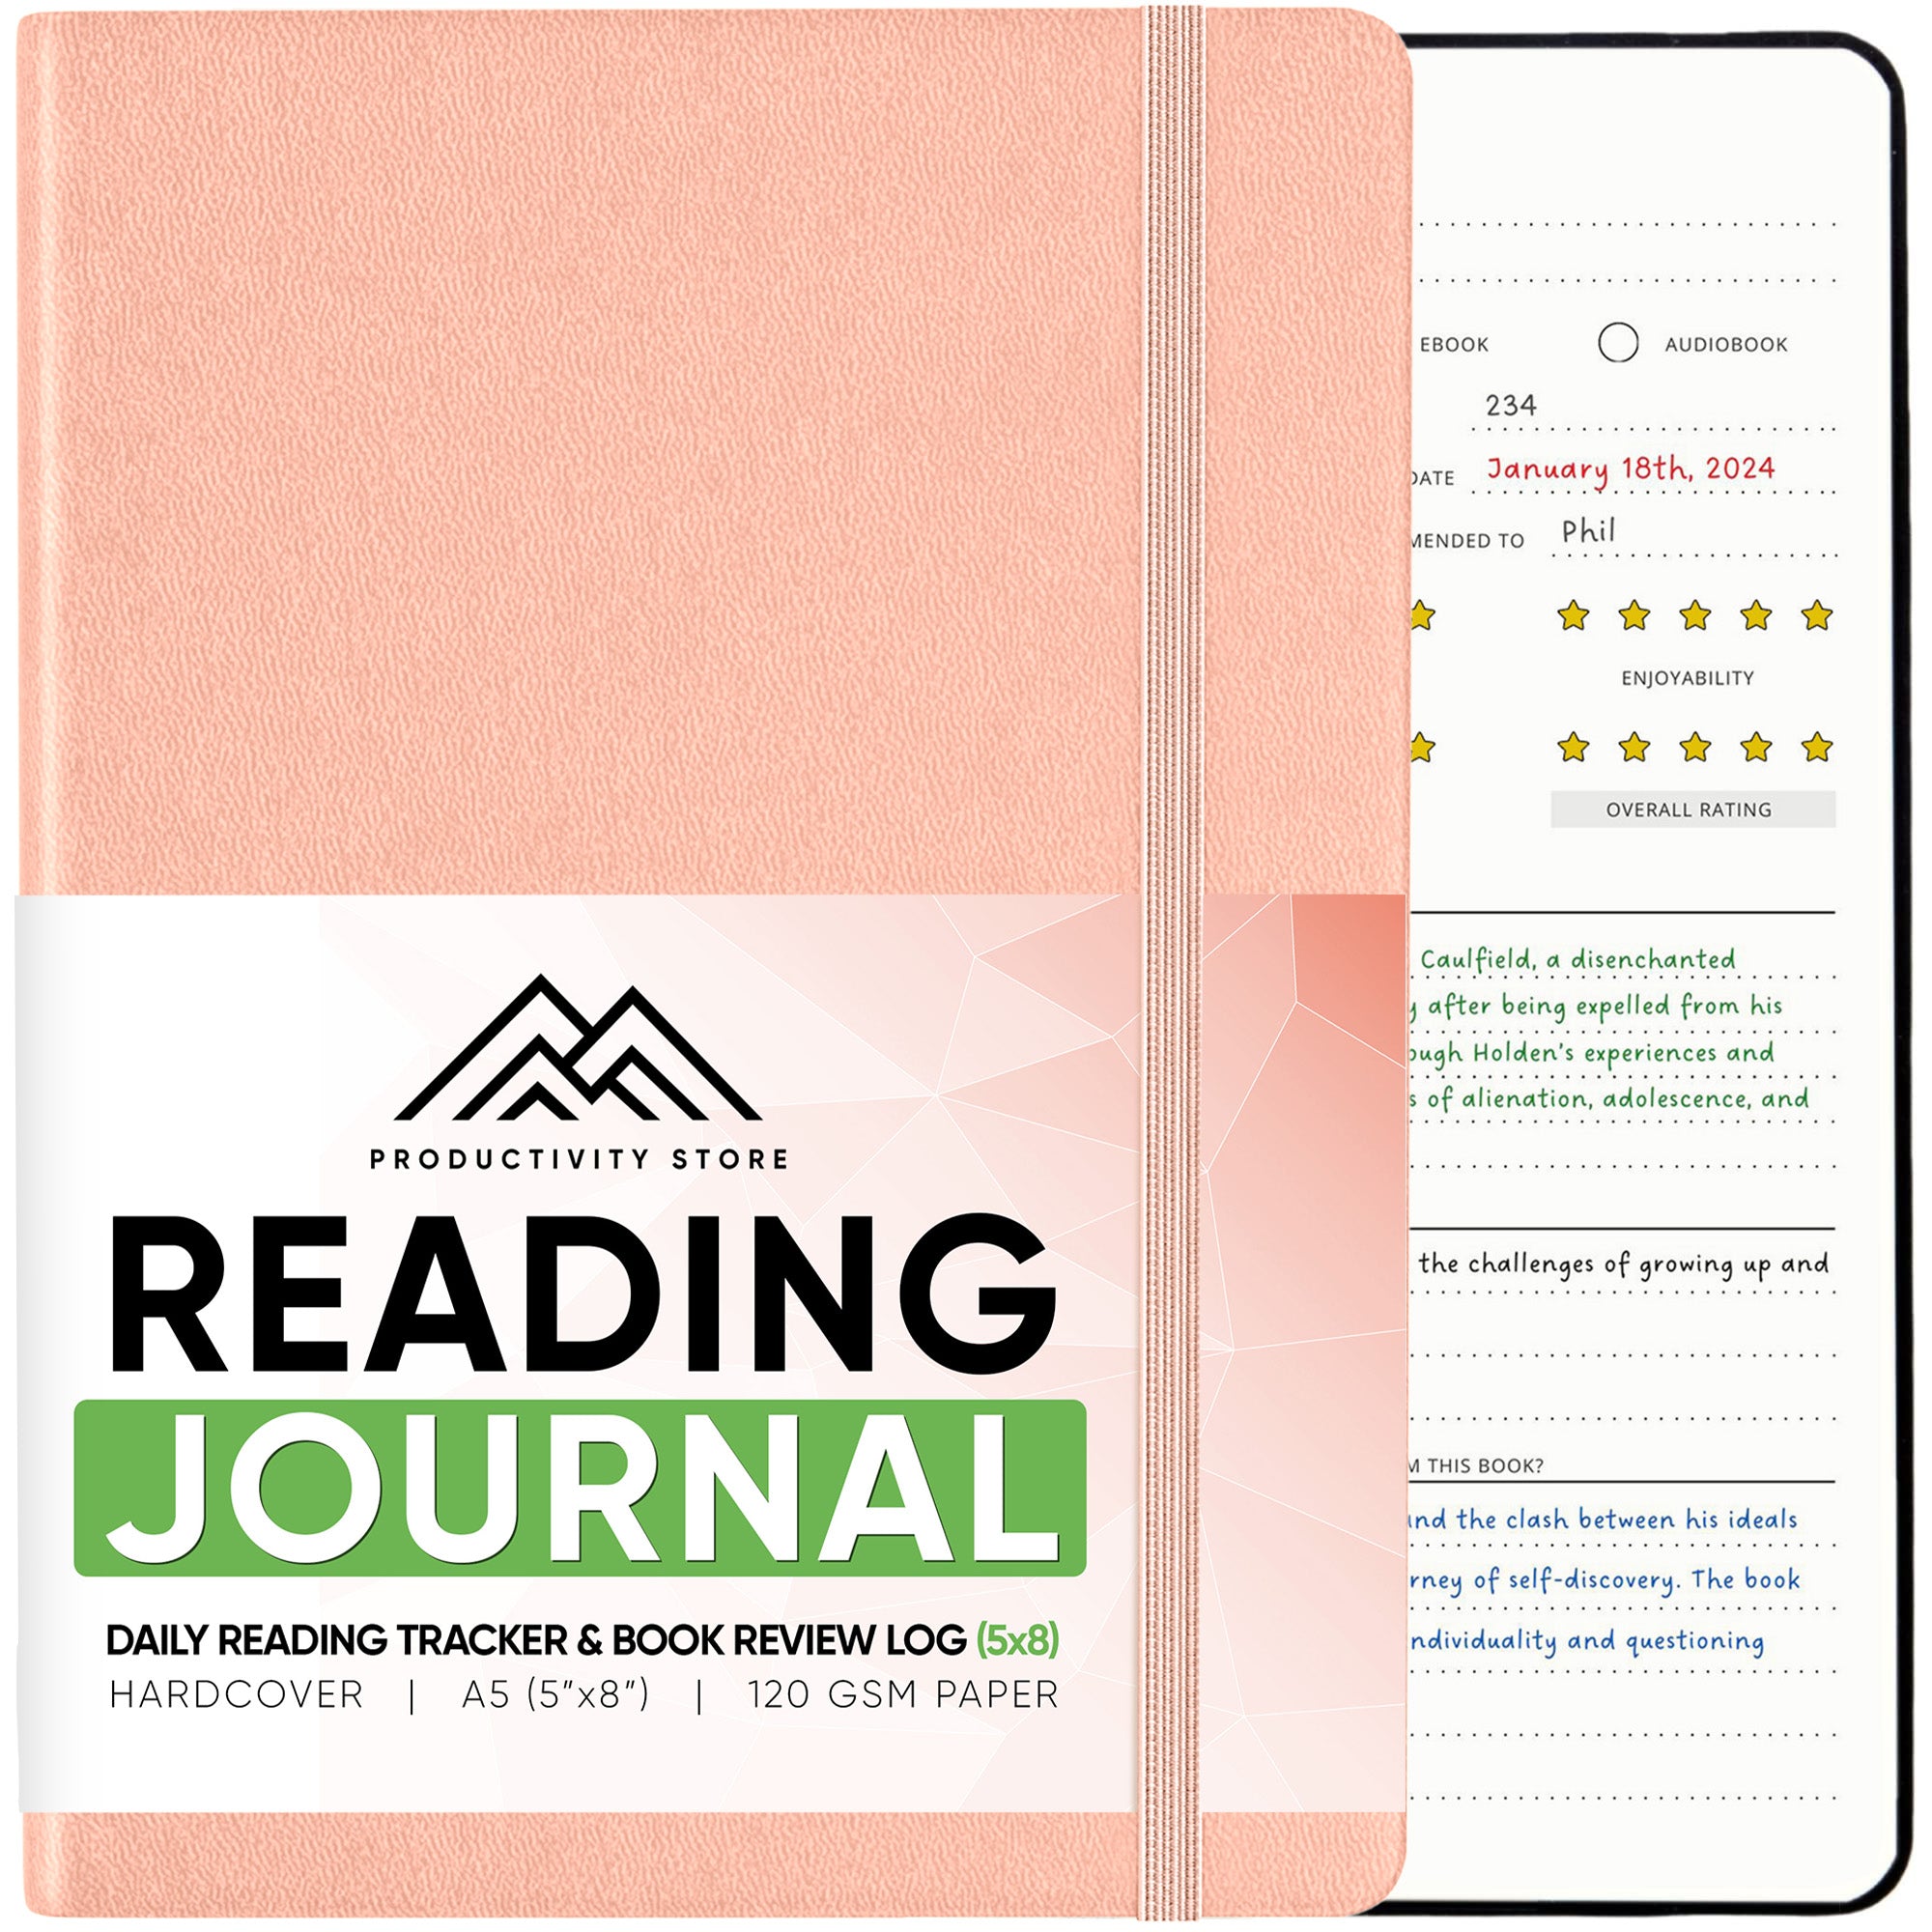 Reading Journal - A5 Size - Book Review & Reading Tracker - Convenient and Organized - for Book Lovers - Productivity Store Light Blue